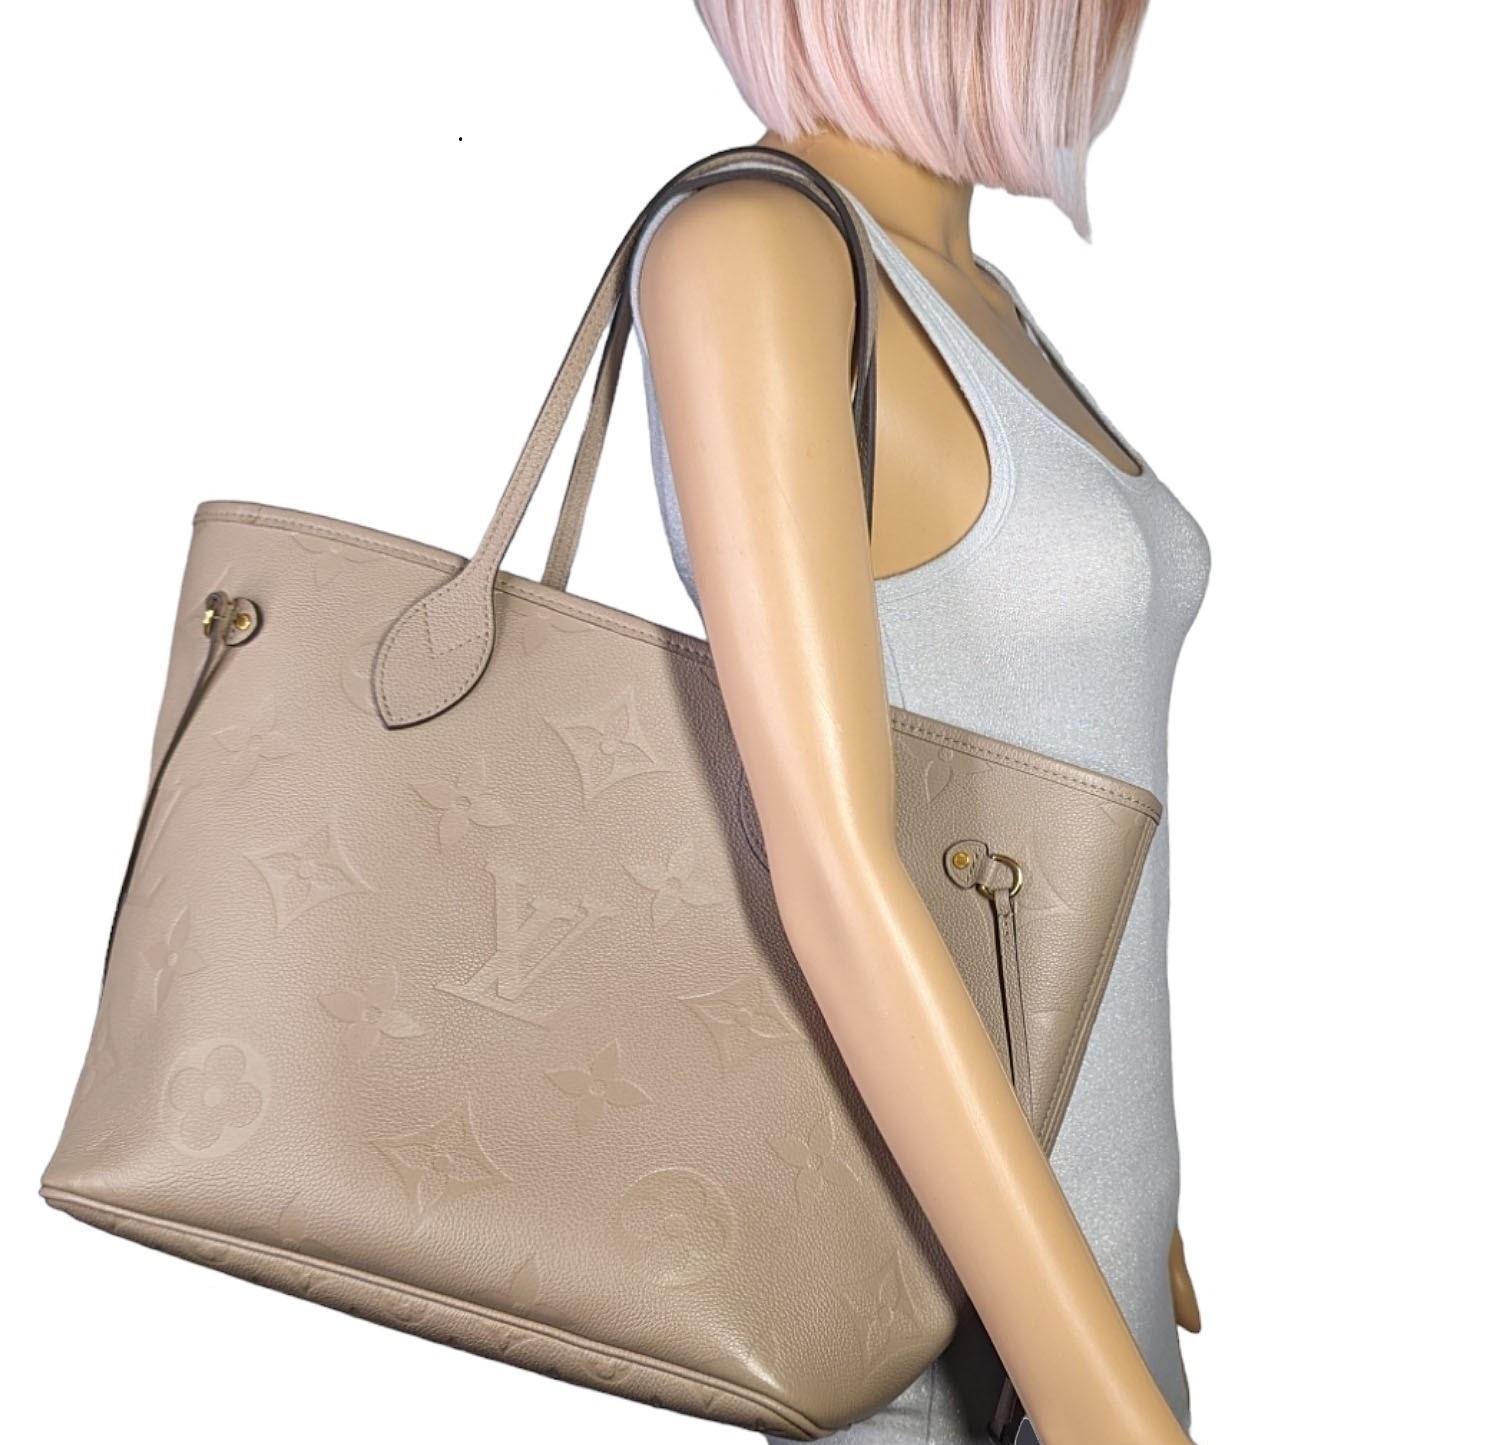 The essential Neverfull MM tote now comes in embossed Monogram Empreinte leather. Its generous dimensions make this bag ideal for everyday use while the long shoulder handles and supple leather mean it’s comfortable to carry. With the side laces